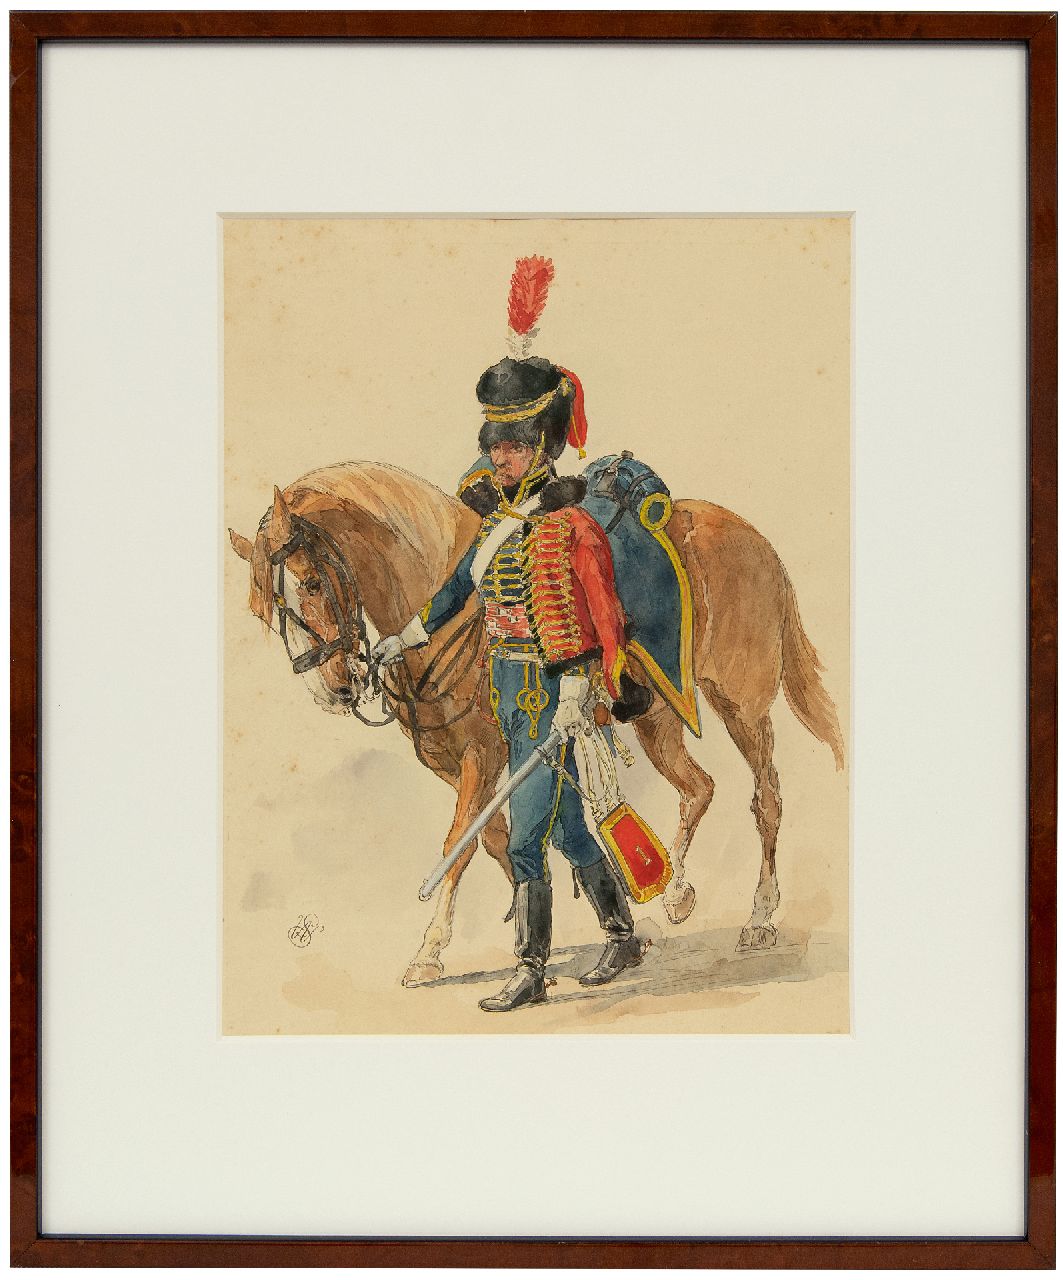 Staring W.C.  | Willem Constantijn Staring | Watercolours and drawings offered for sale | Dragoon next to his horse, ink and watercolour on paper 29.5 x 22.6 cm, signed l.l. with monogram